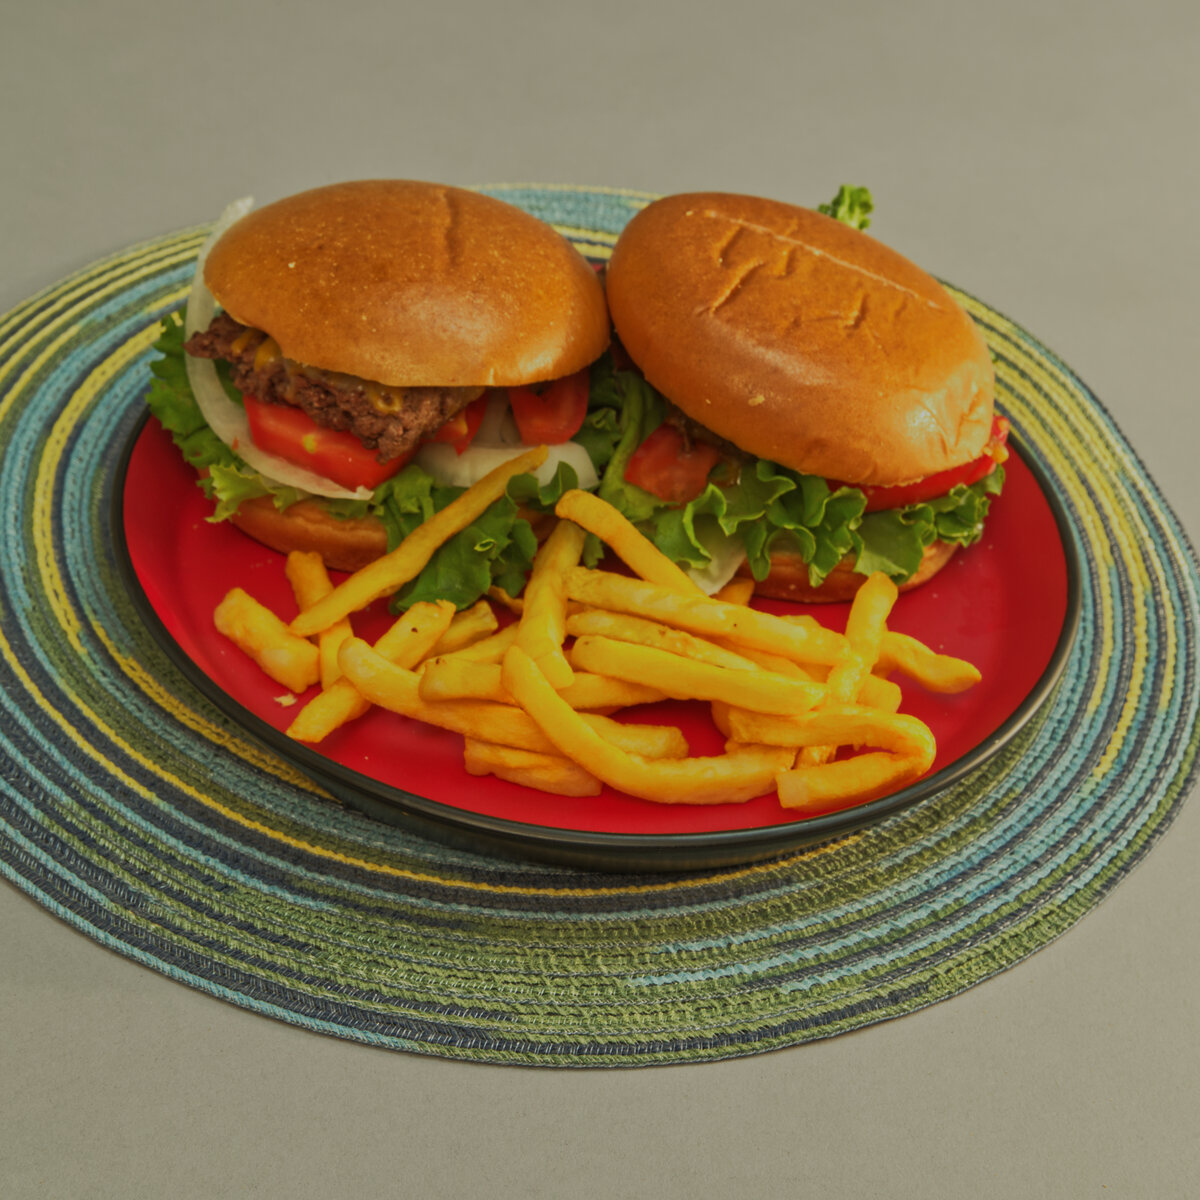 Lamburgers with French Fries